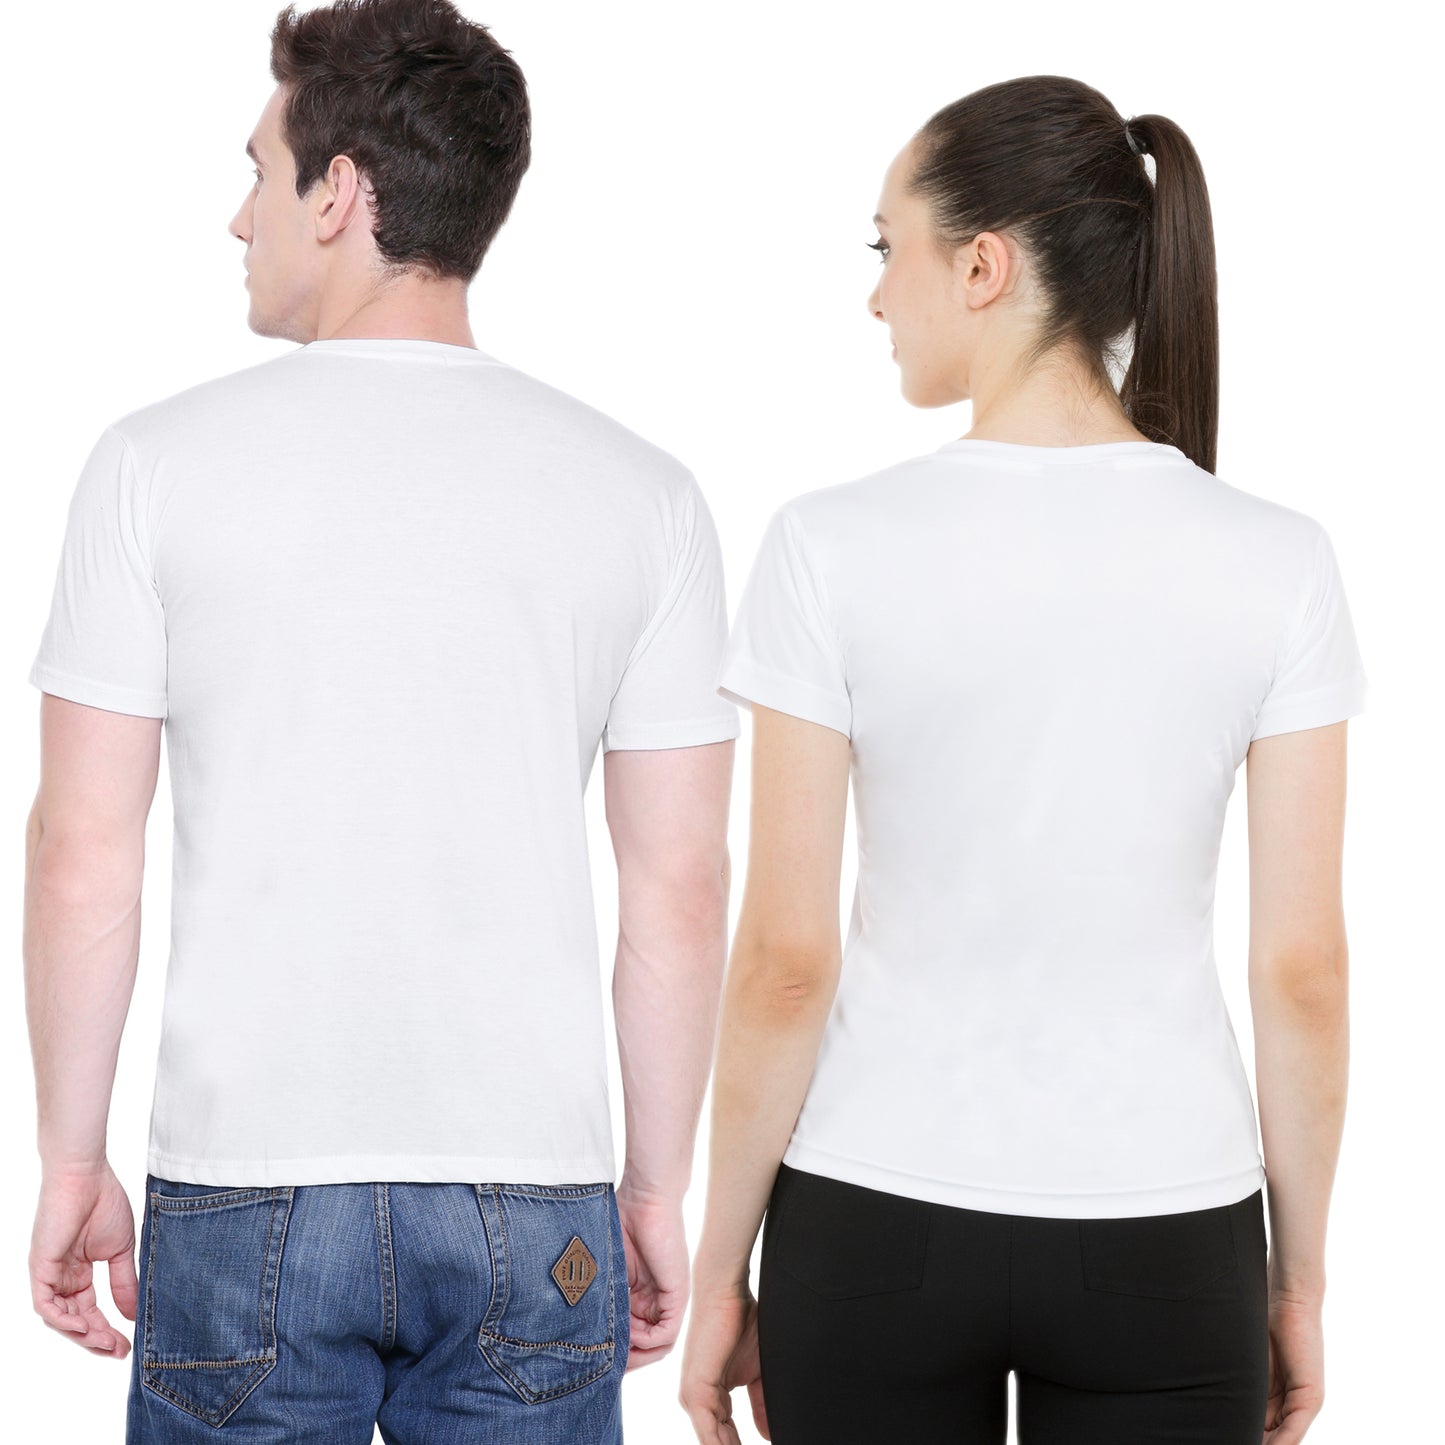 Cupid Love matching Couple T shirts- White